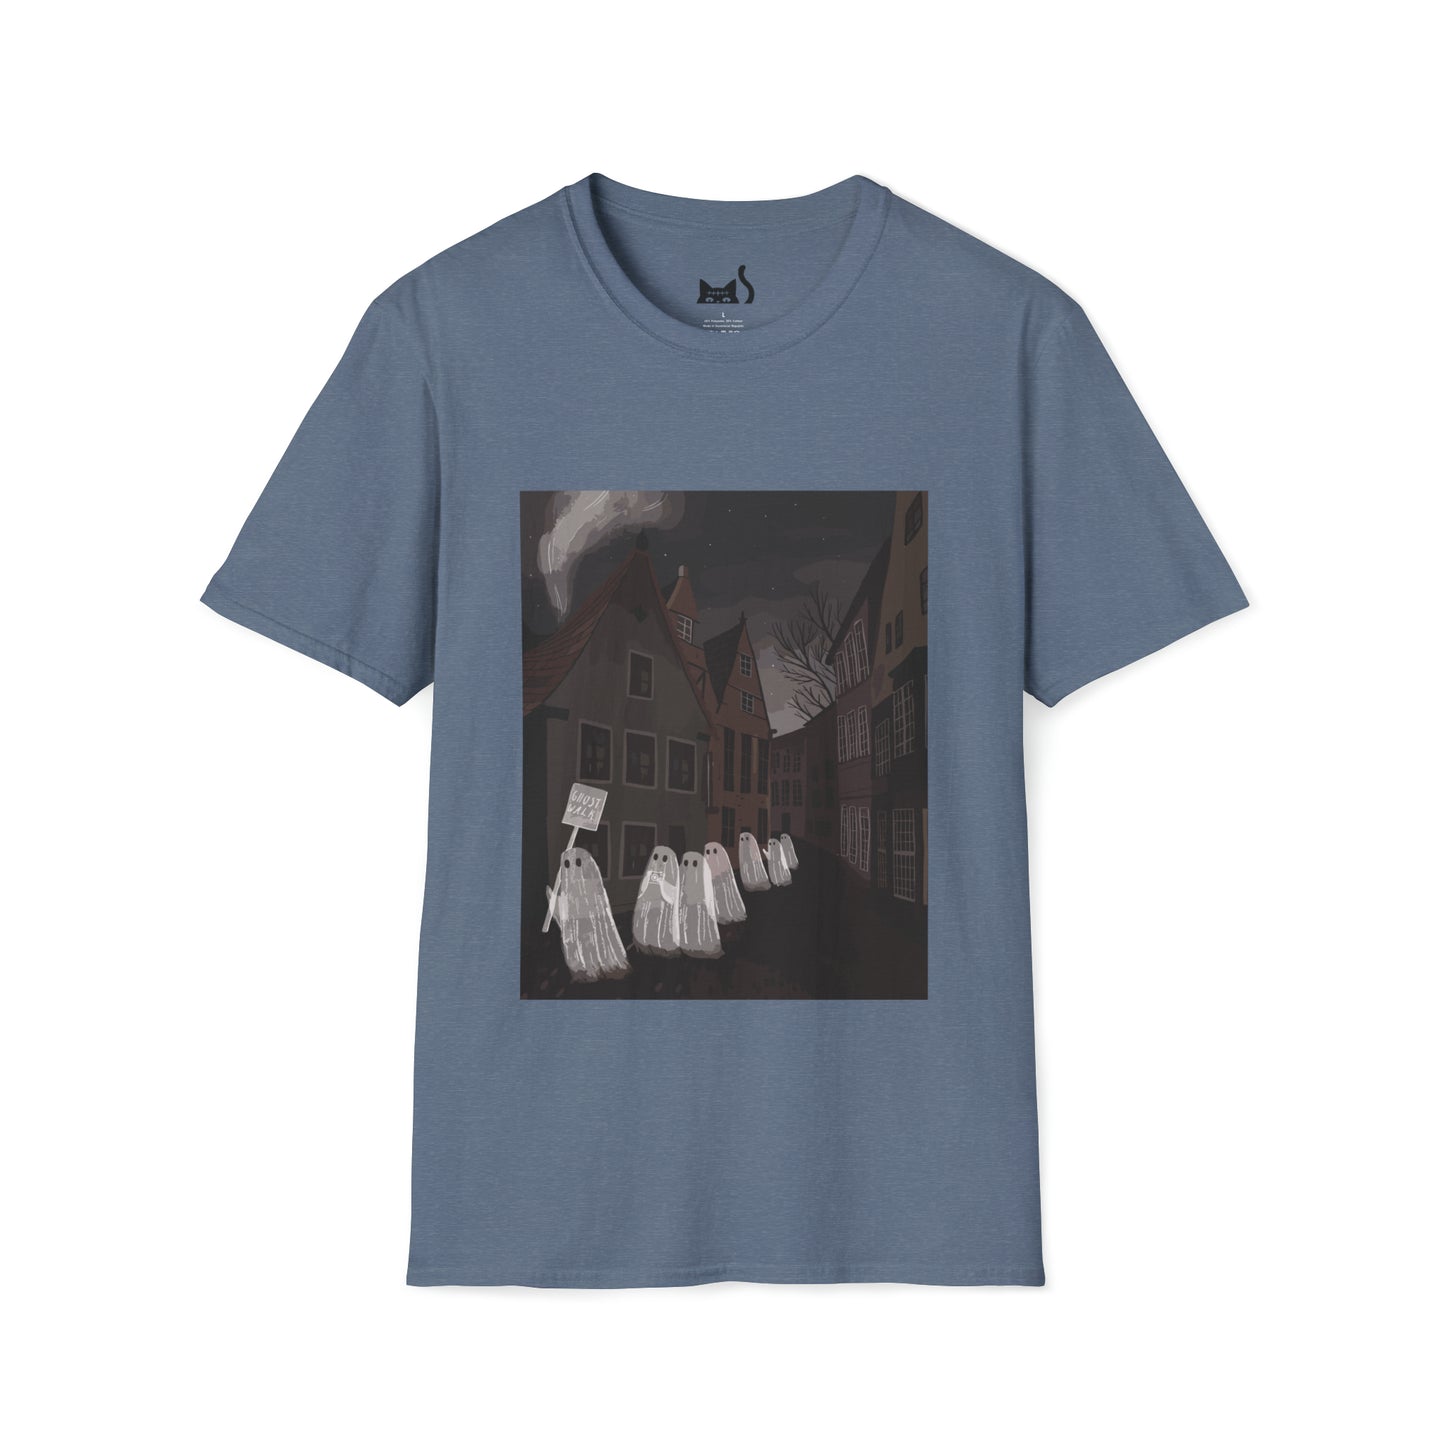 Ghostly parade T-shirt